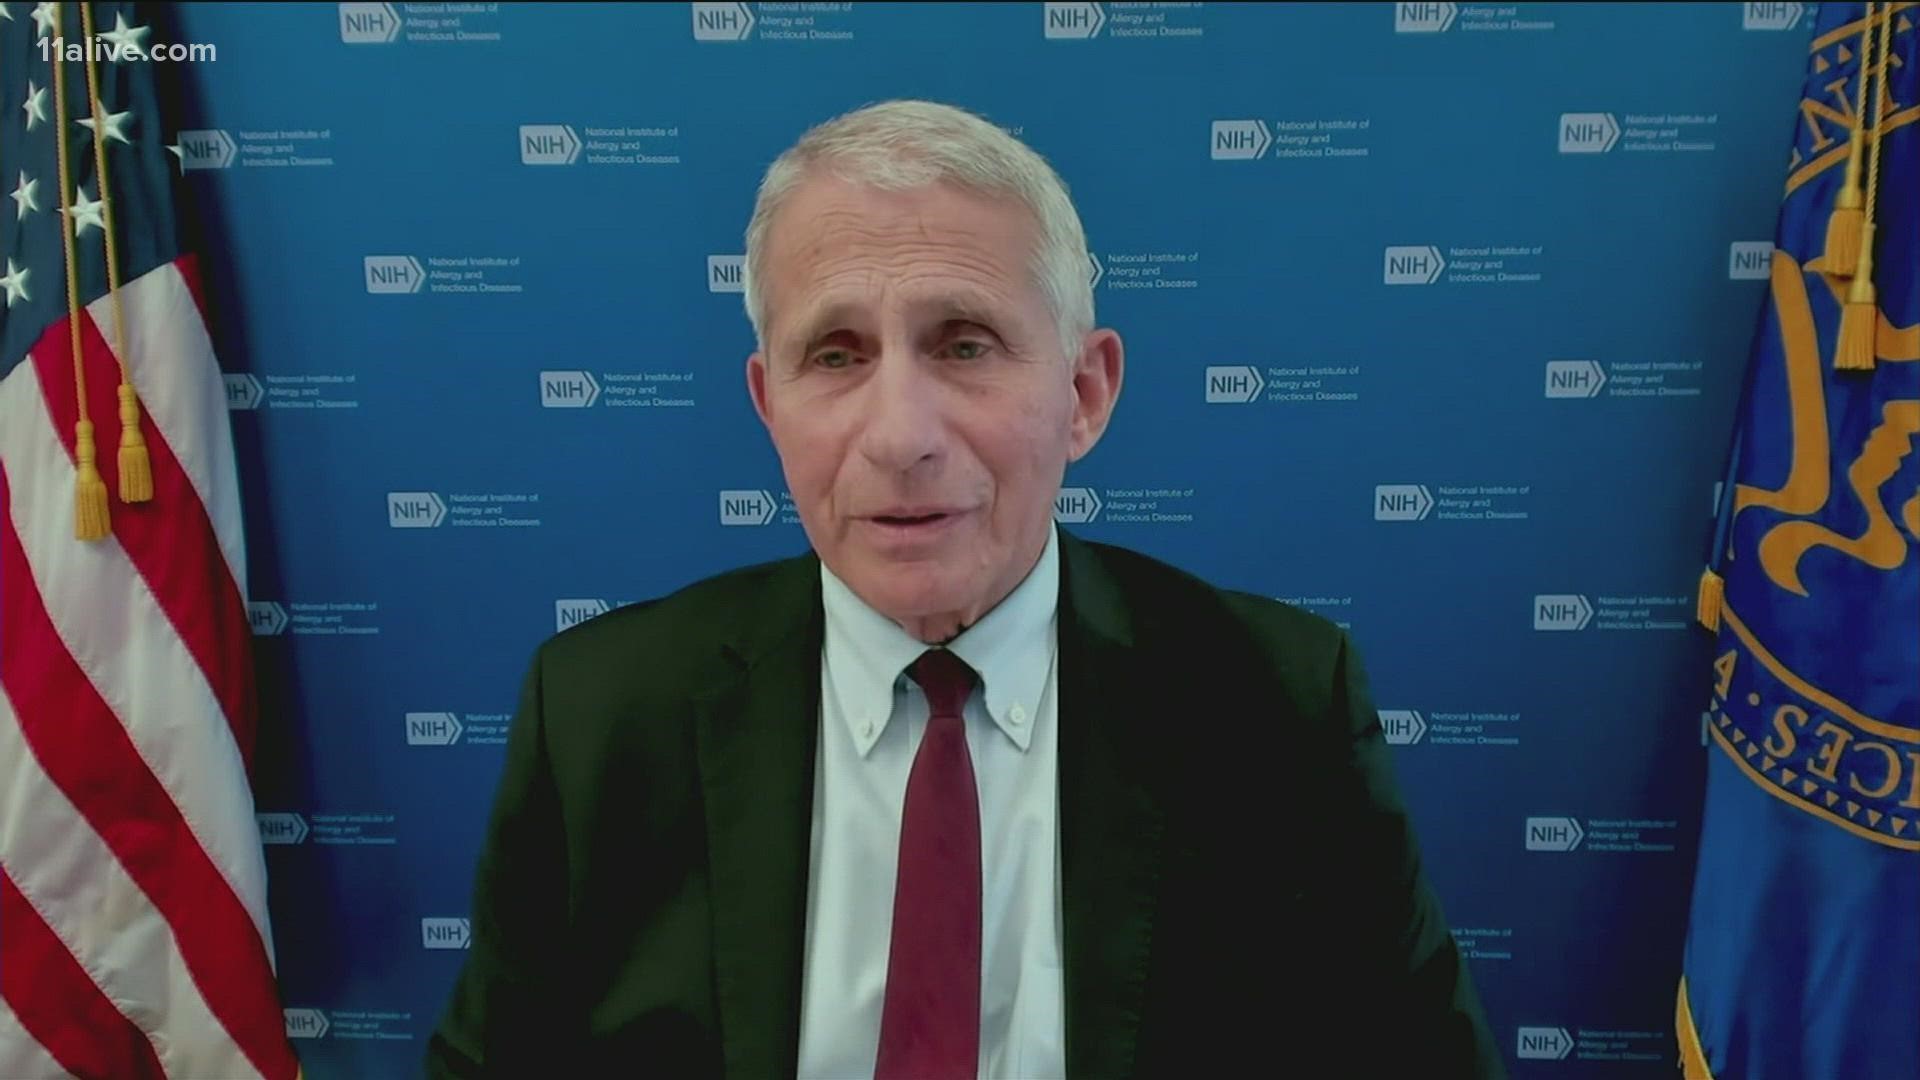 Dr. Anthony Fauci spoke about the variant, first observed in Colombia.